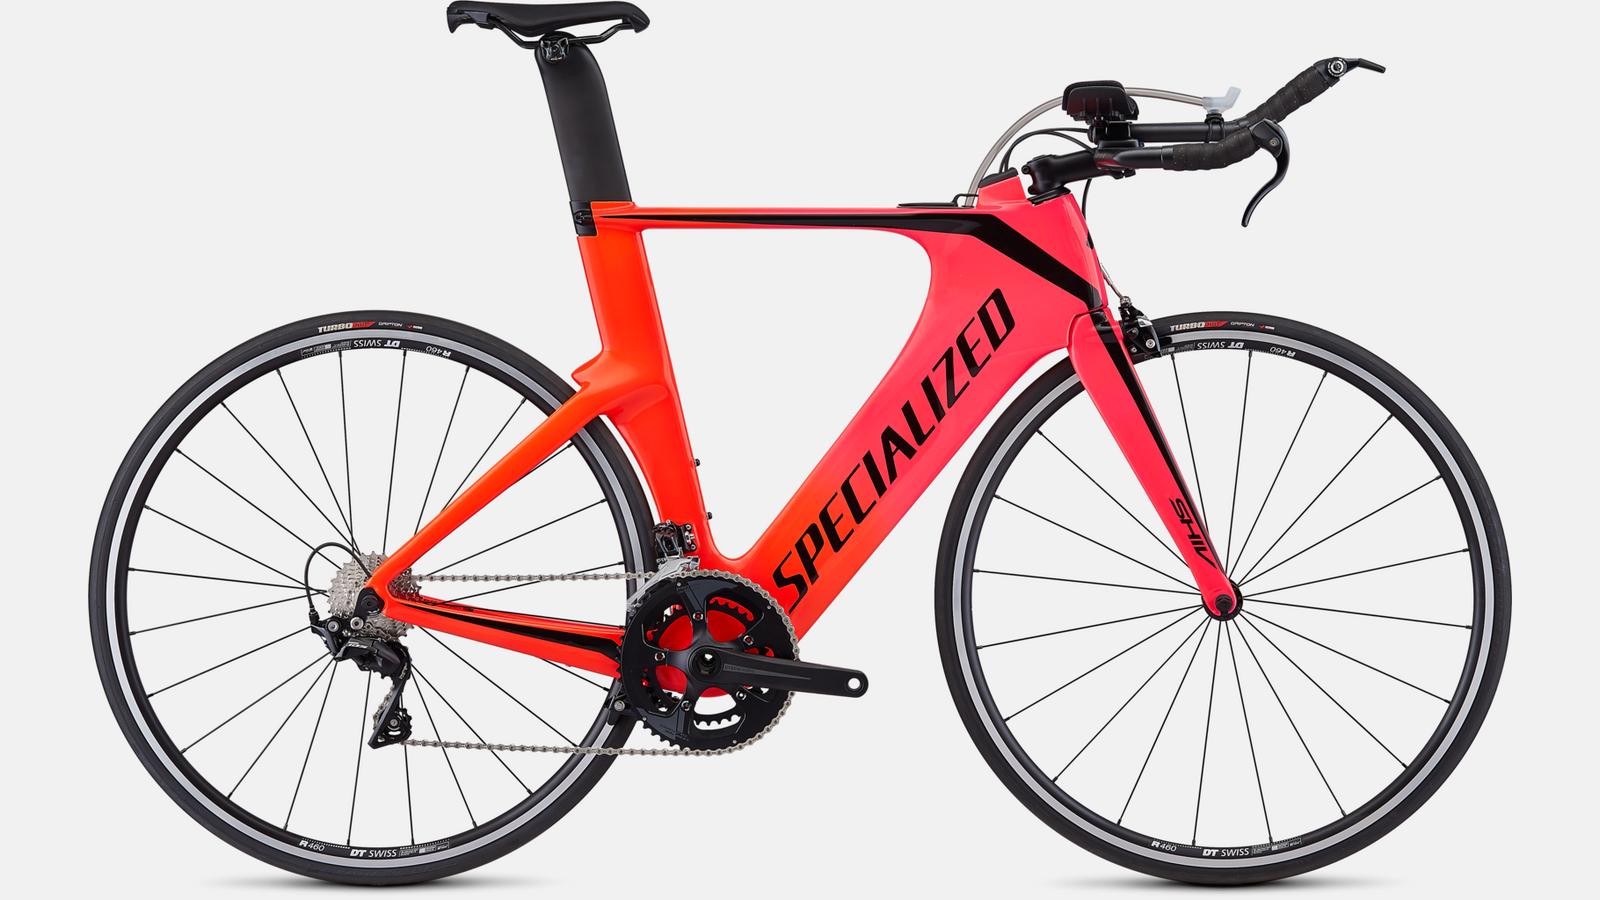 Paint for 2019 Specialized Shiv Elite - Gloss Acid Pink